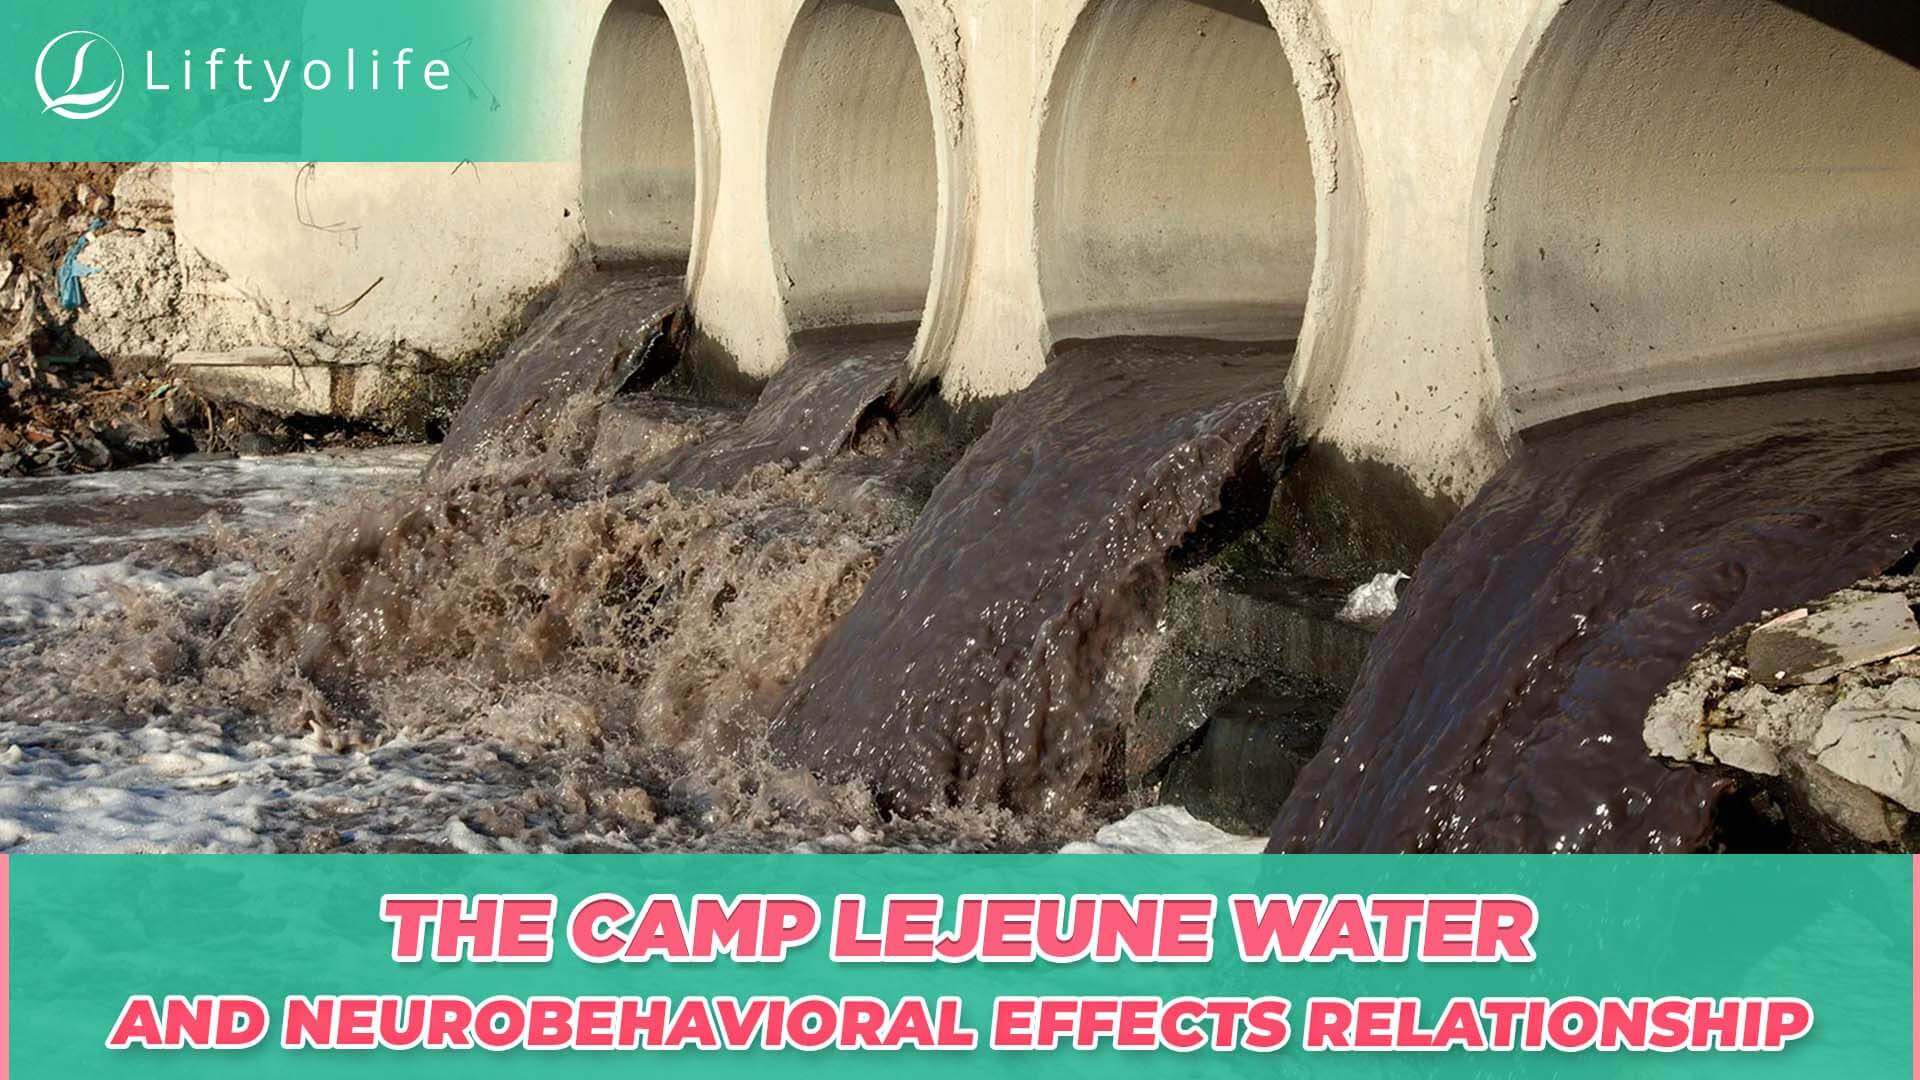 The Relationship Between Camp Lejeune Water and Neurobehavioral Effects